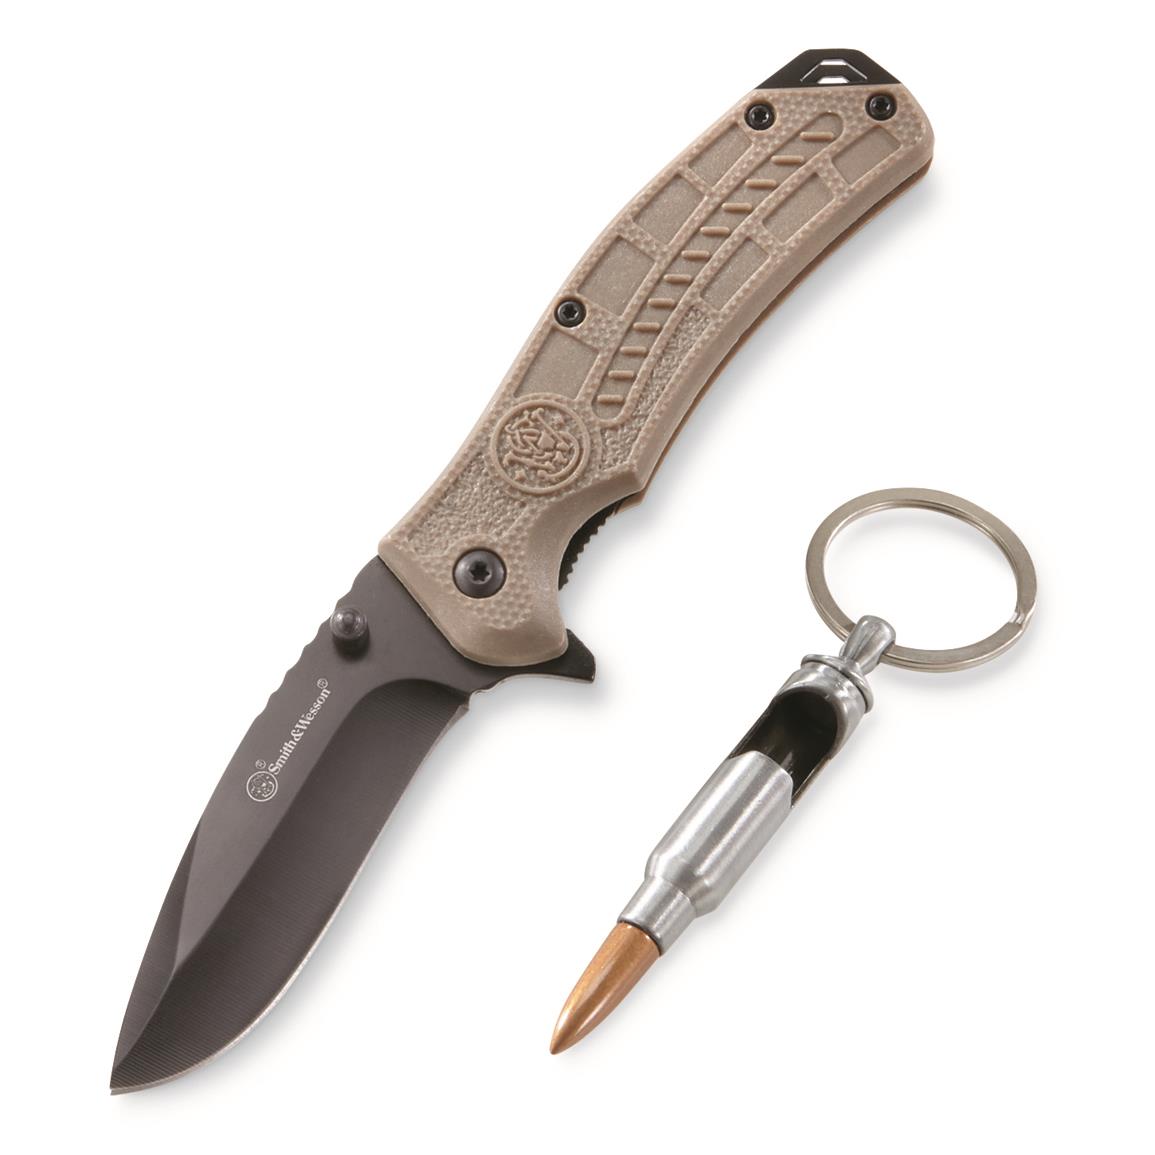 Smith & Wesson HRT Spring Assist Knife with Bottle Opener Keychain, Olive Drab